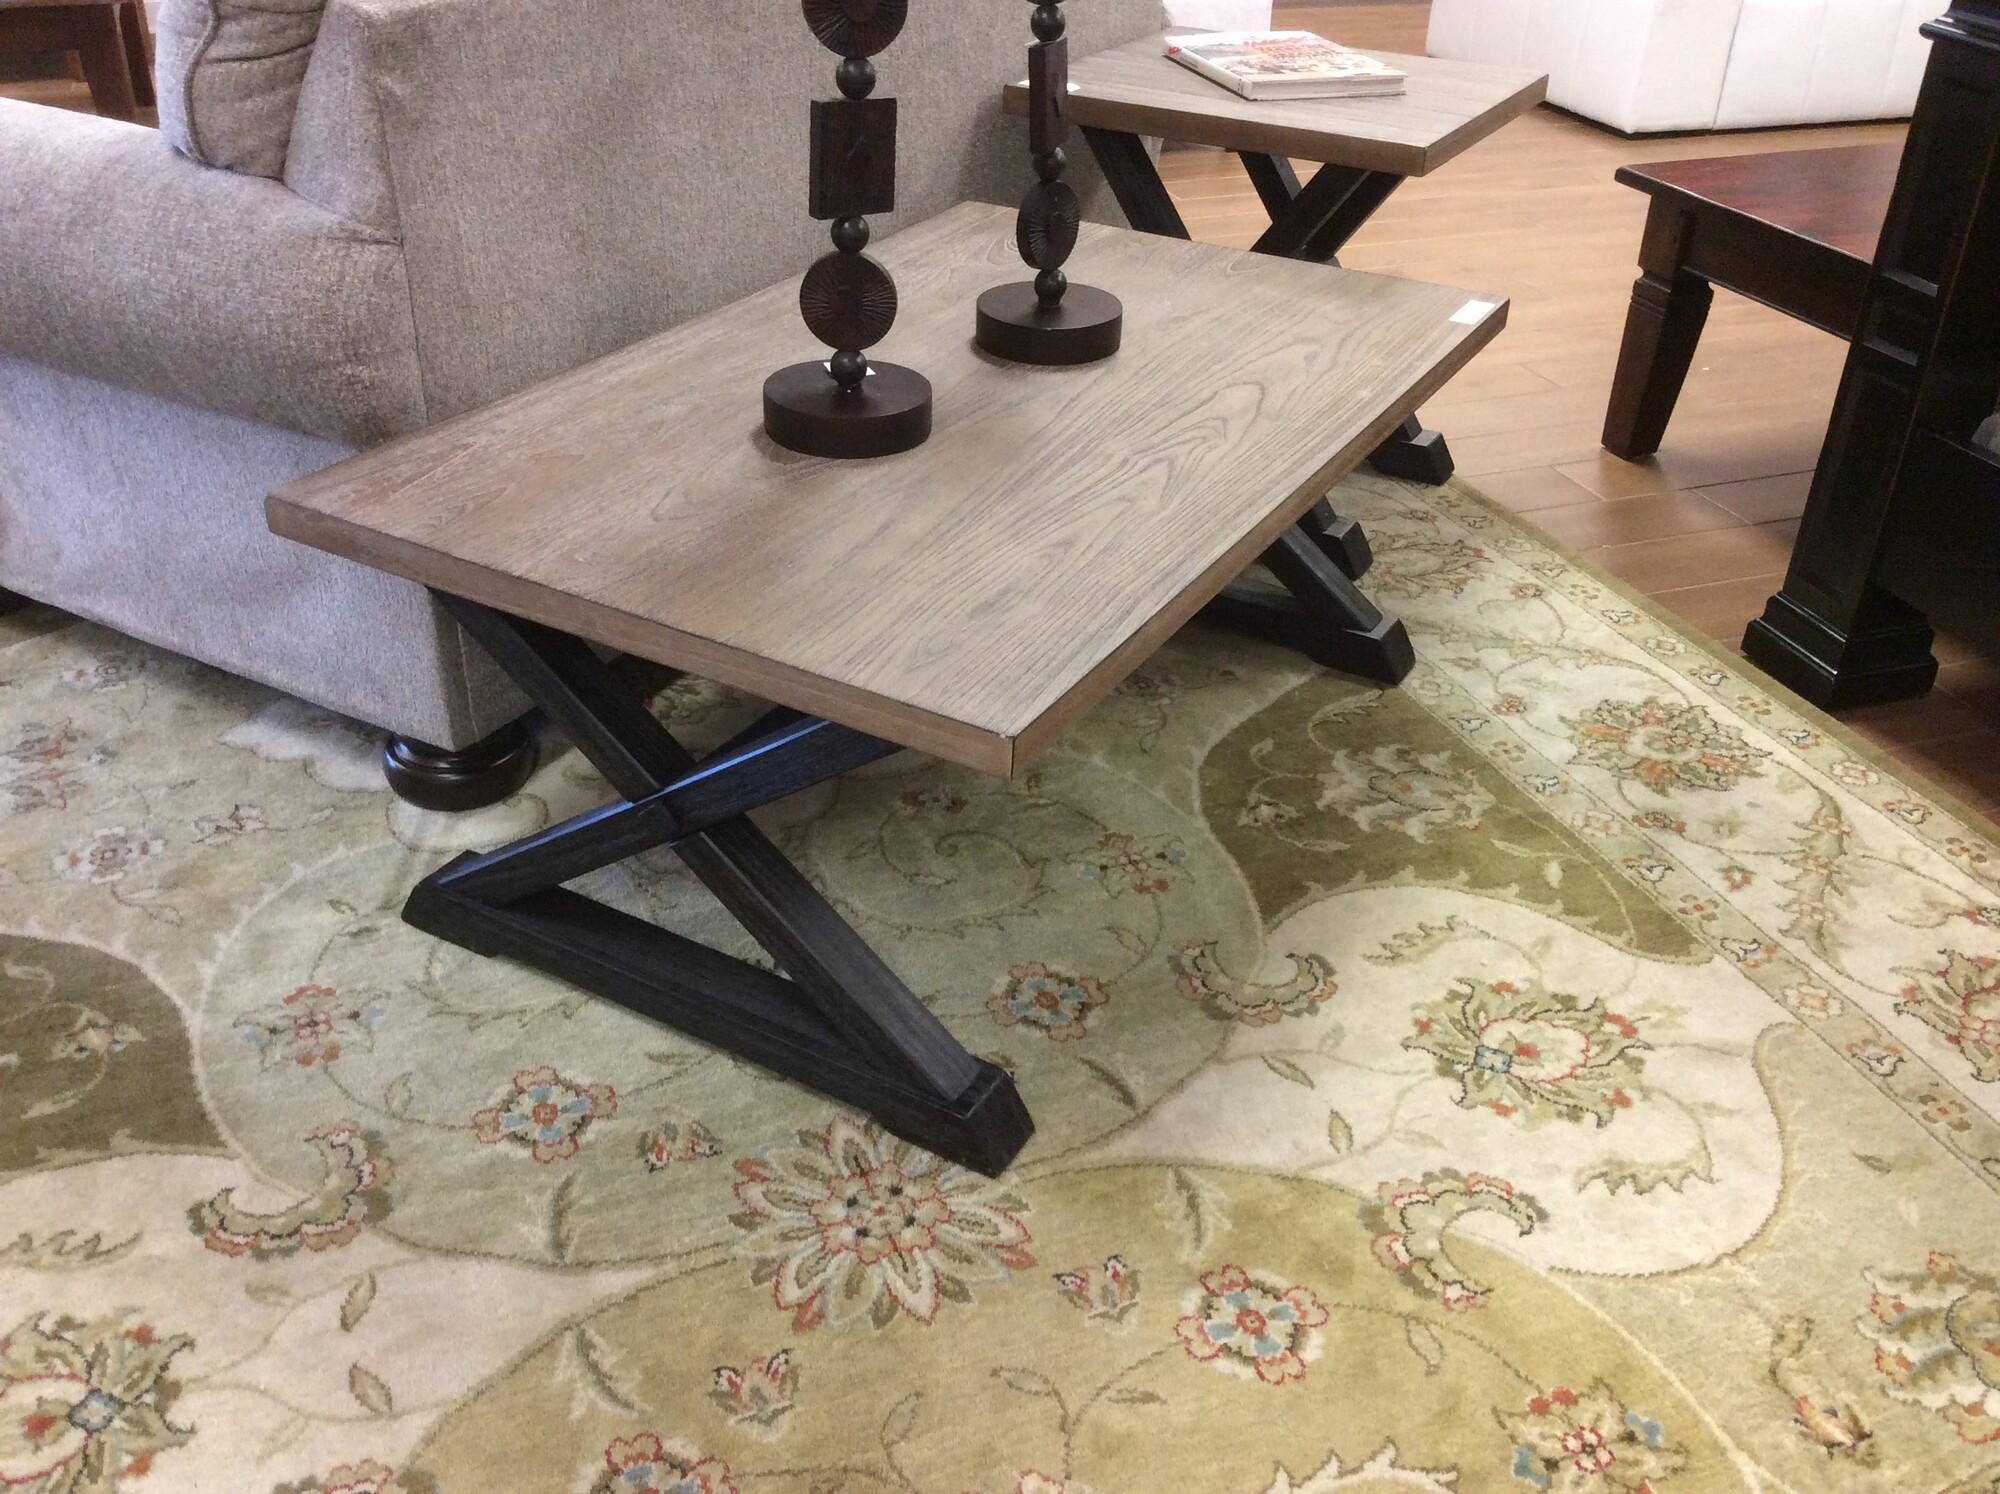 This is a Rustic, Weathered Light Brown Wood Coffee Table and End Table. Both Coffee Table and End Table have the Barn Door \"X\" Dark Stained Legs. These pieces come from Yaxin Furniture Company.